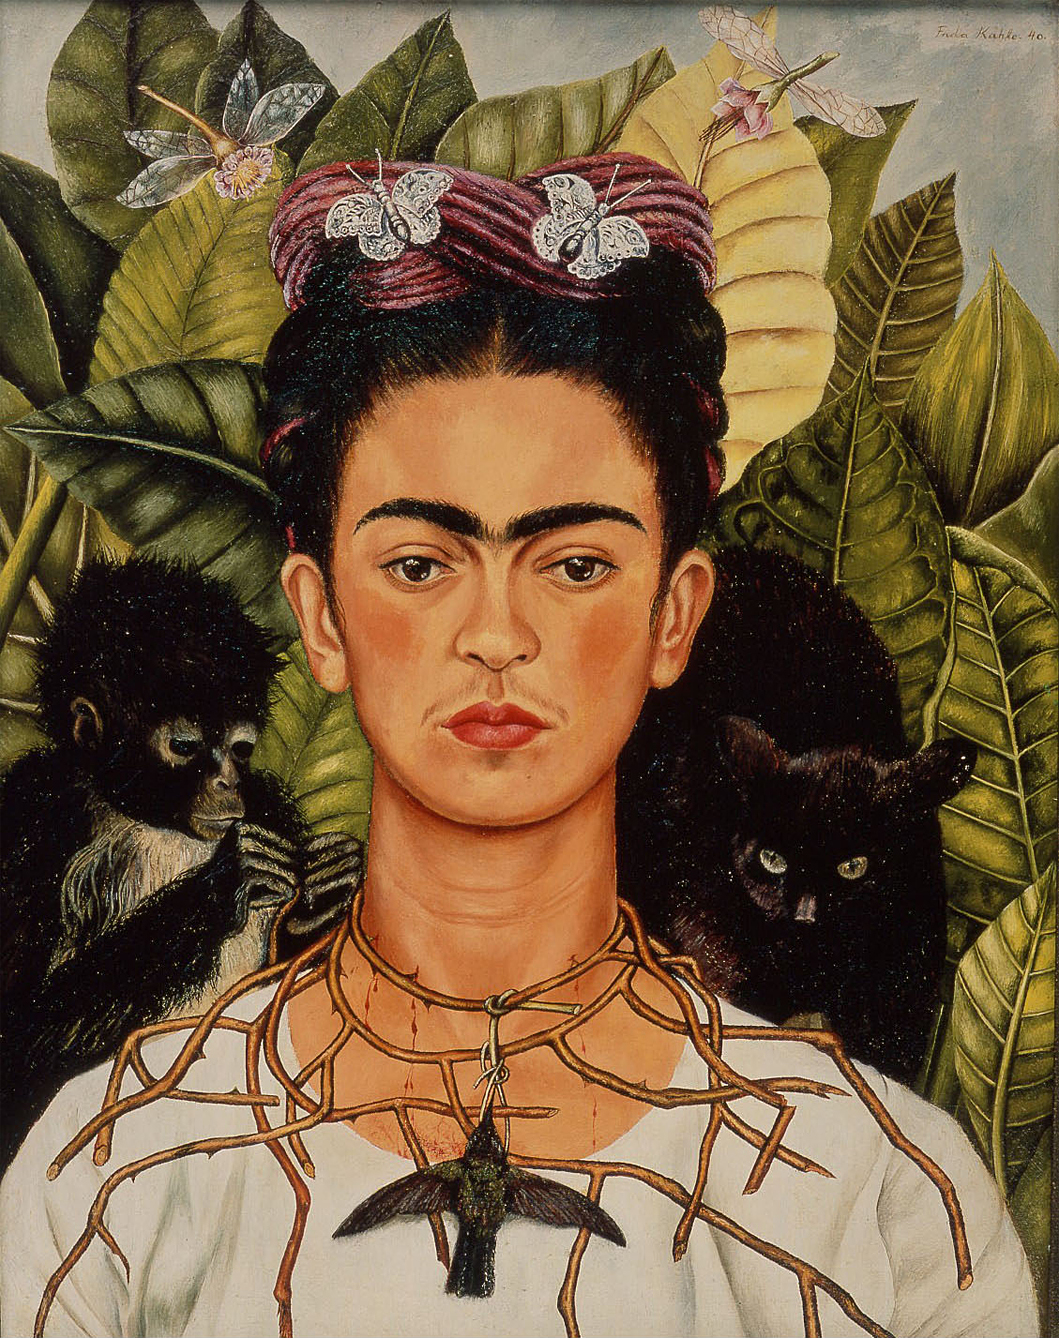 Self-portrait with Thorn Necklace and Hummingbird by Frida Kahlo - 1940 - 63,5 x 49,5 cm Harry Ransom Center